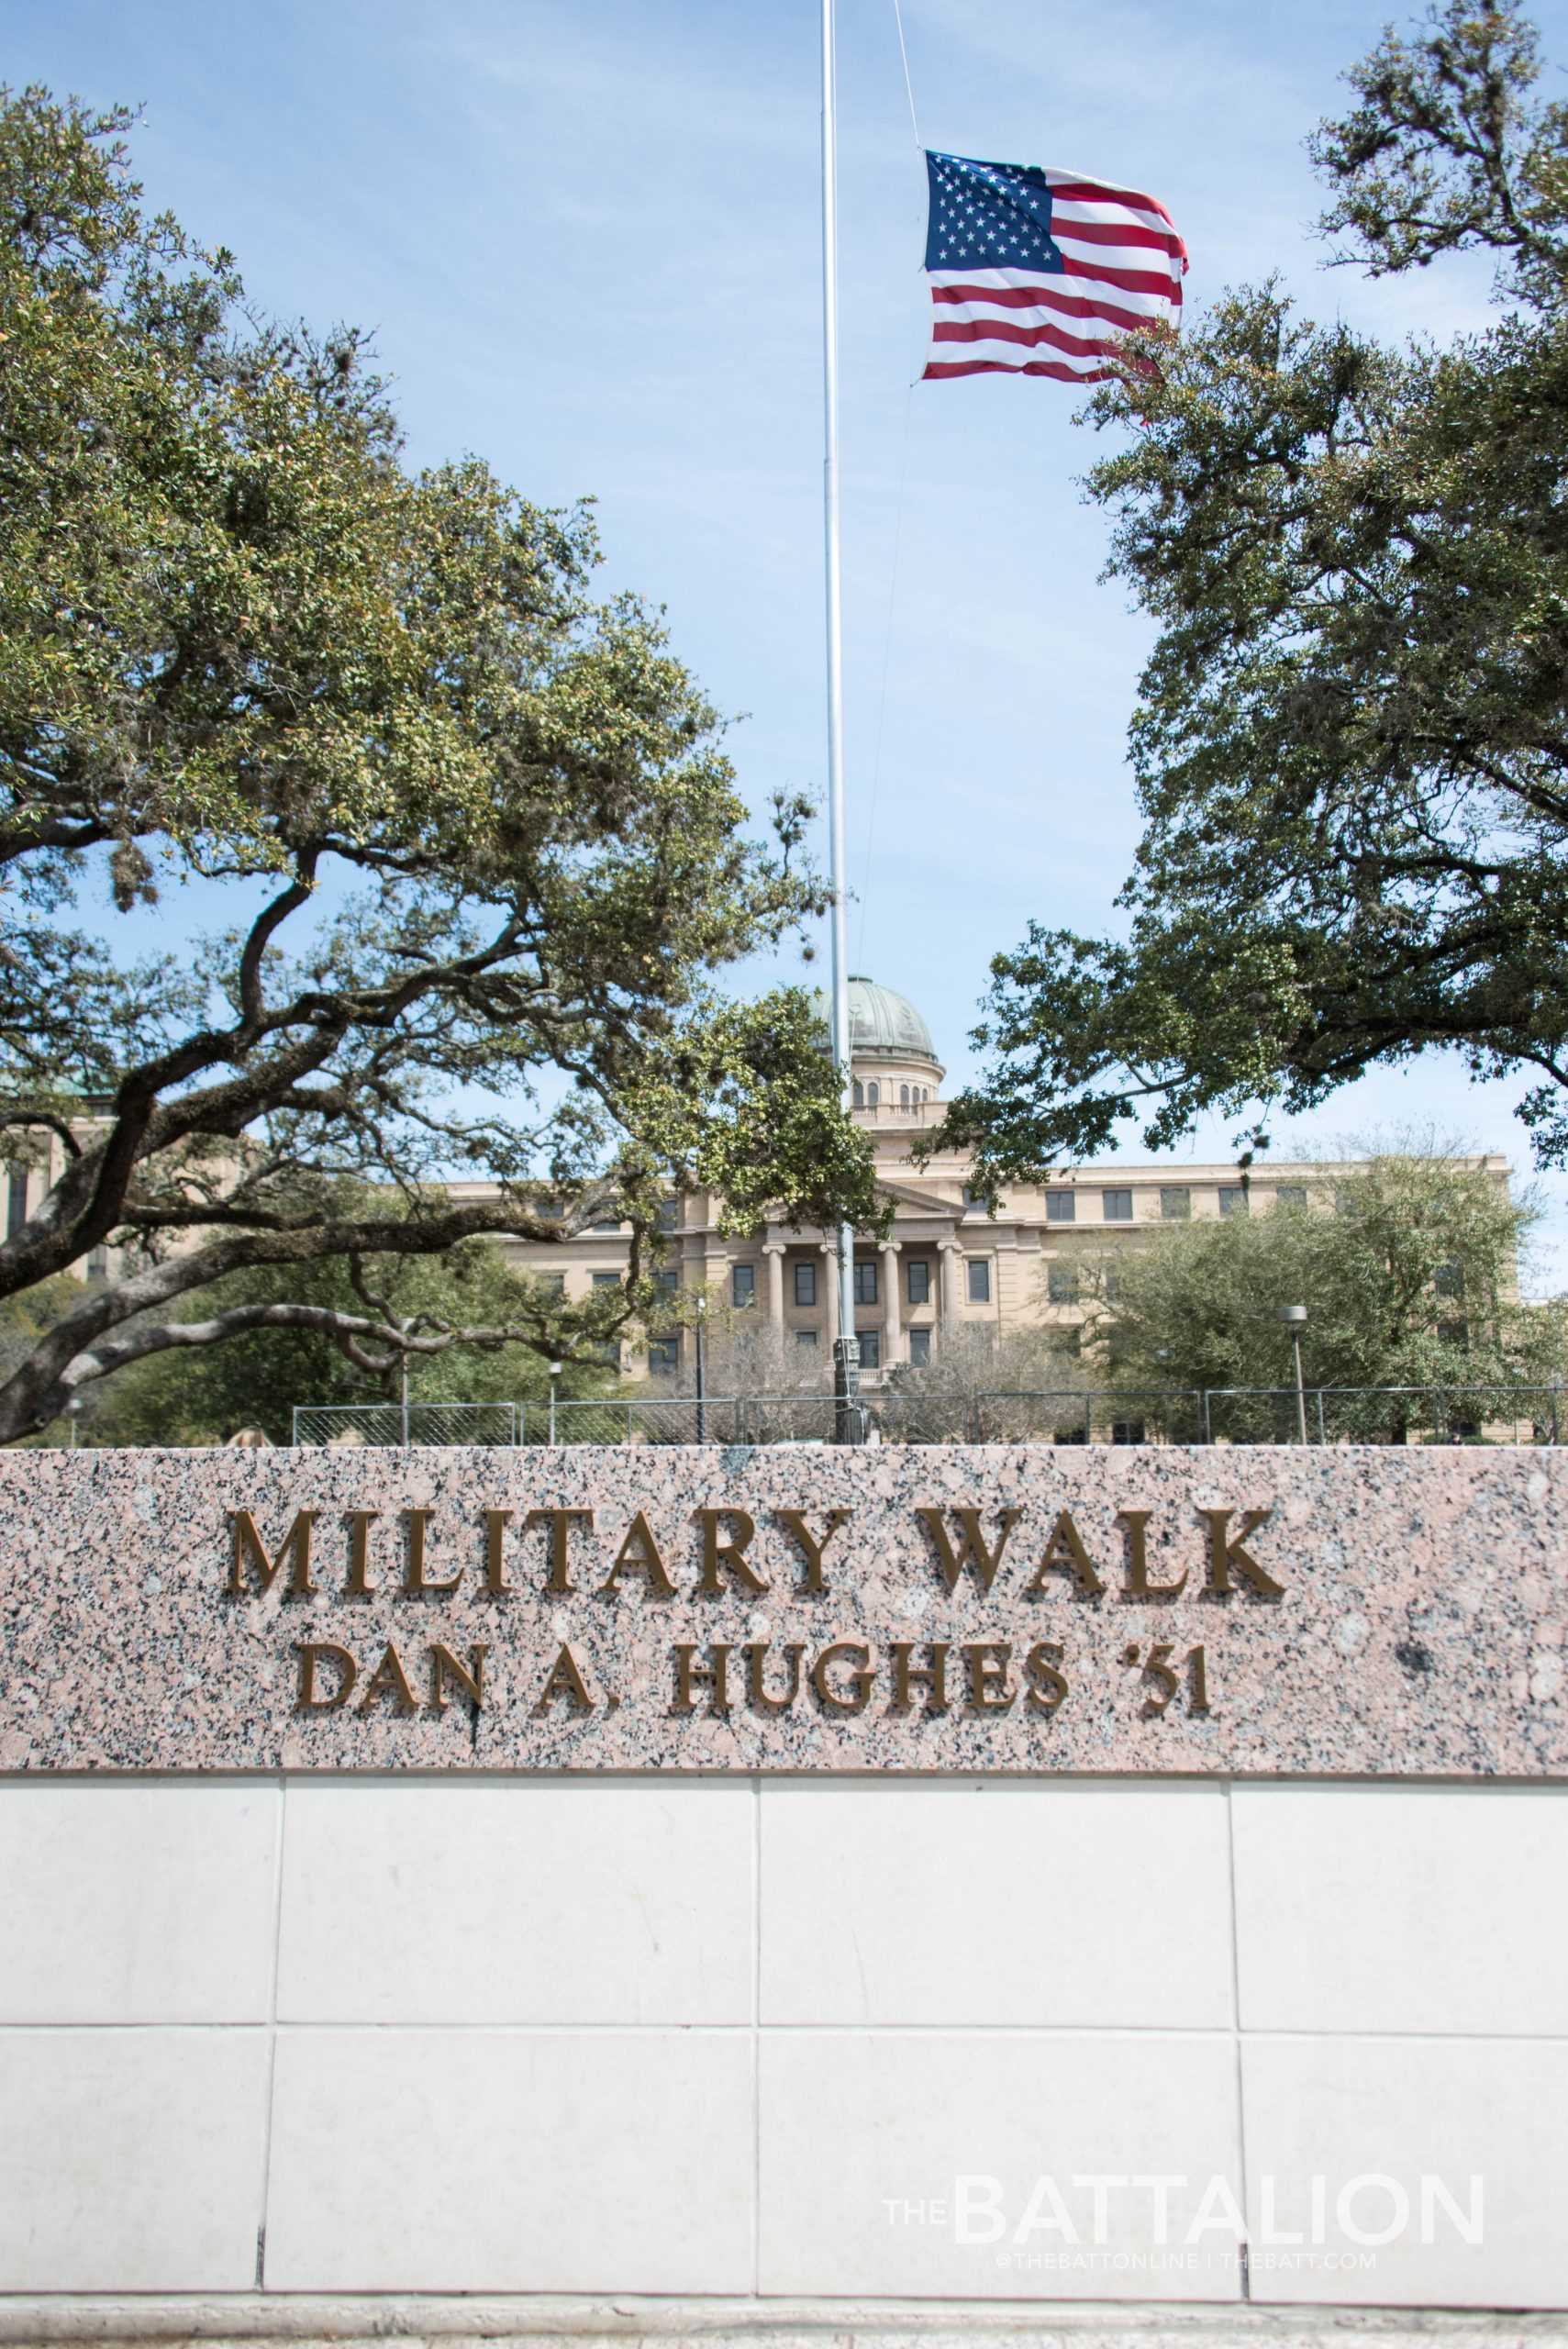 Corps+and+military+monuments+on+campus